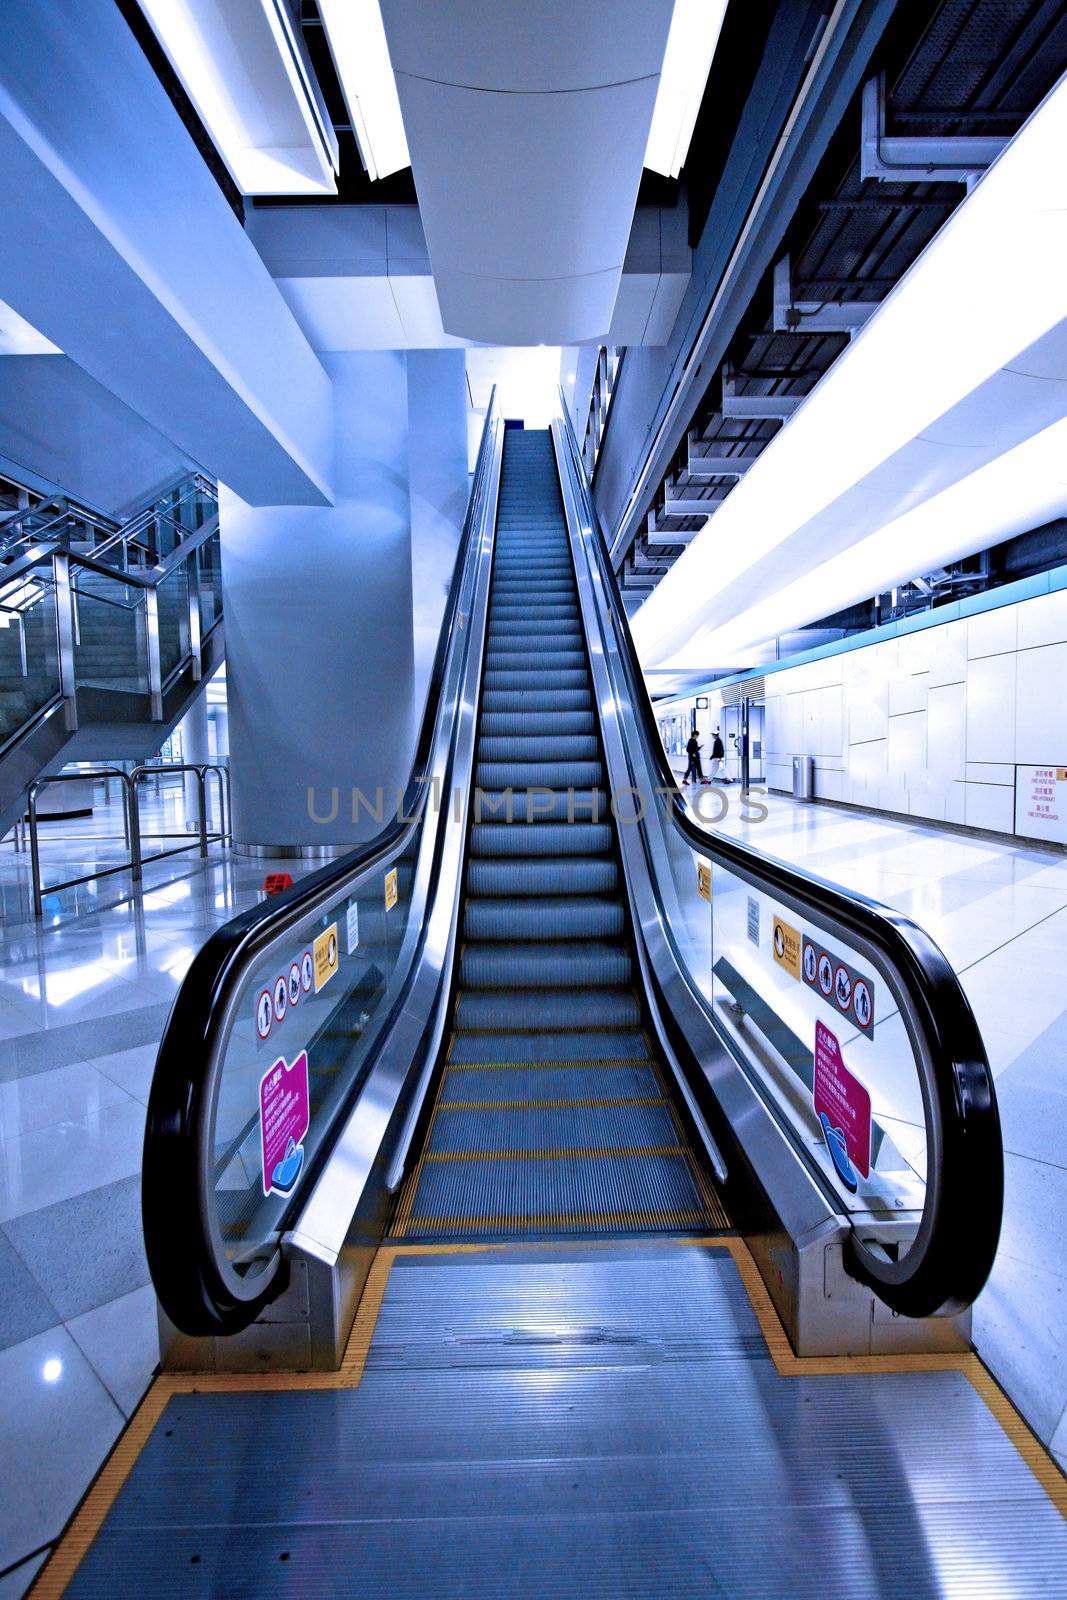 Moving escalator in a subway station by kawing921